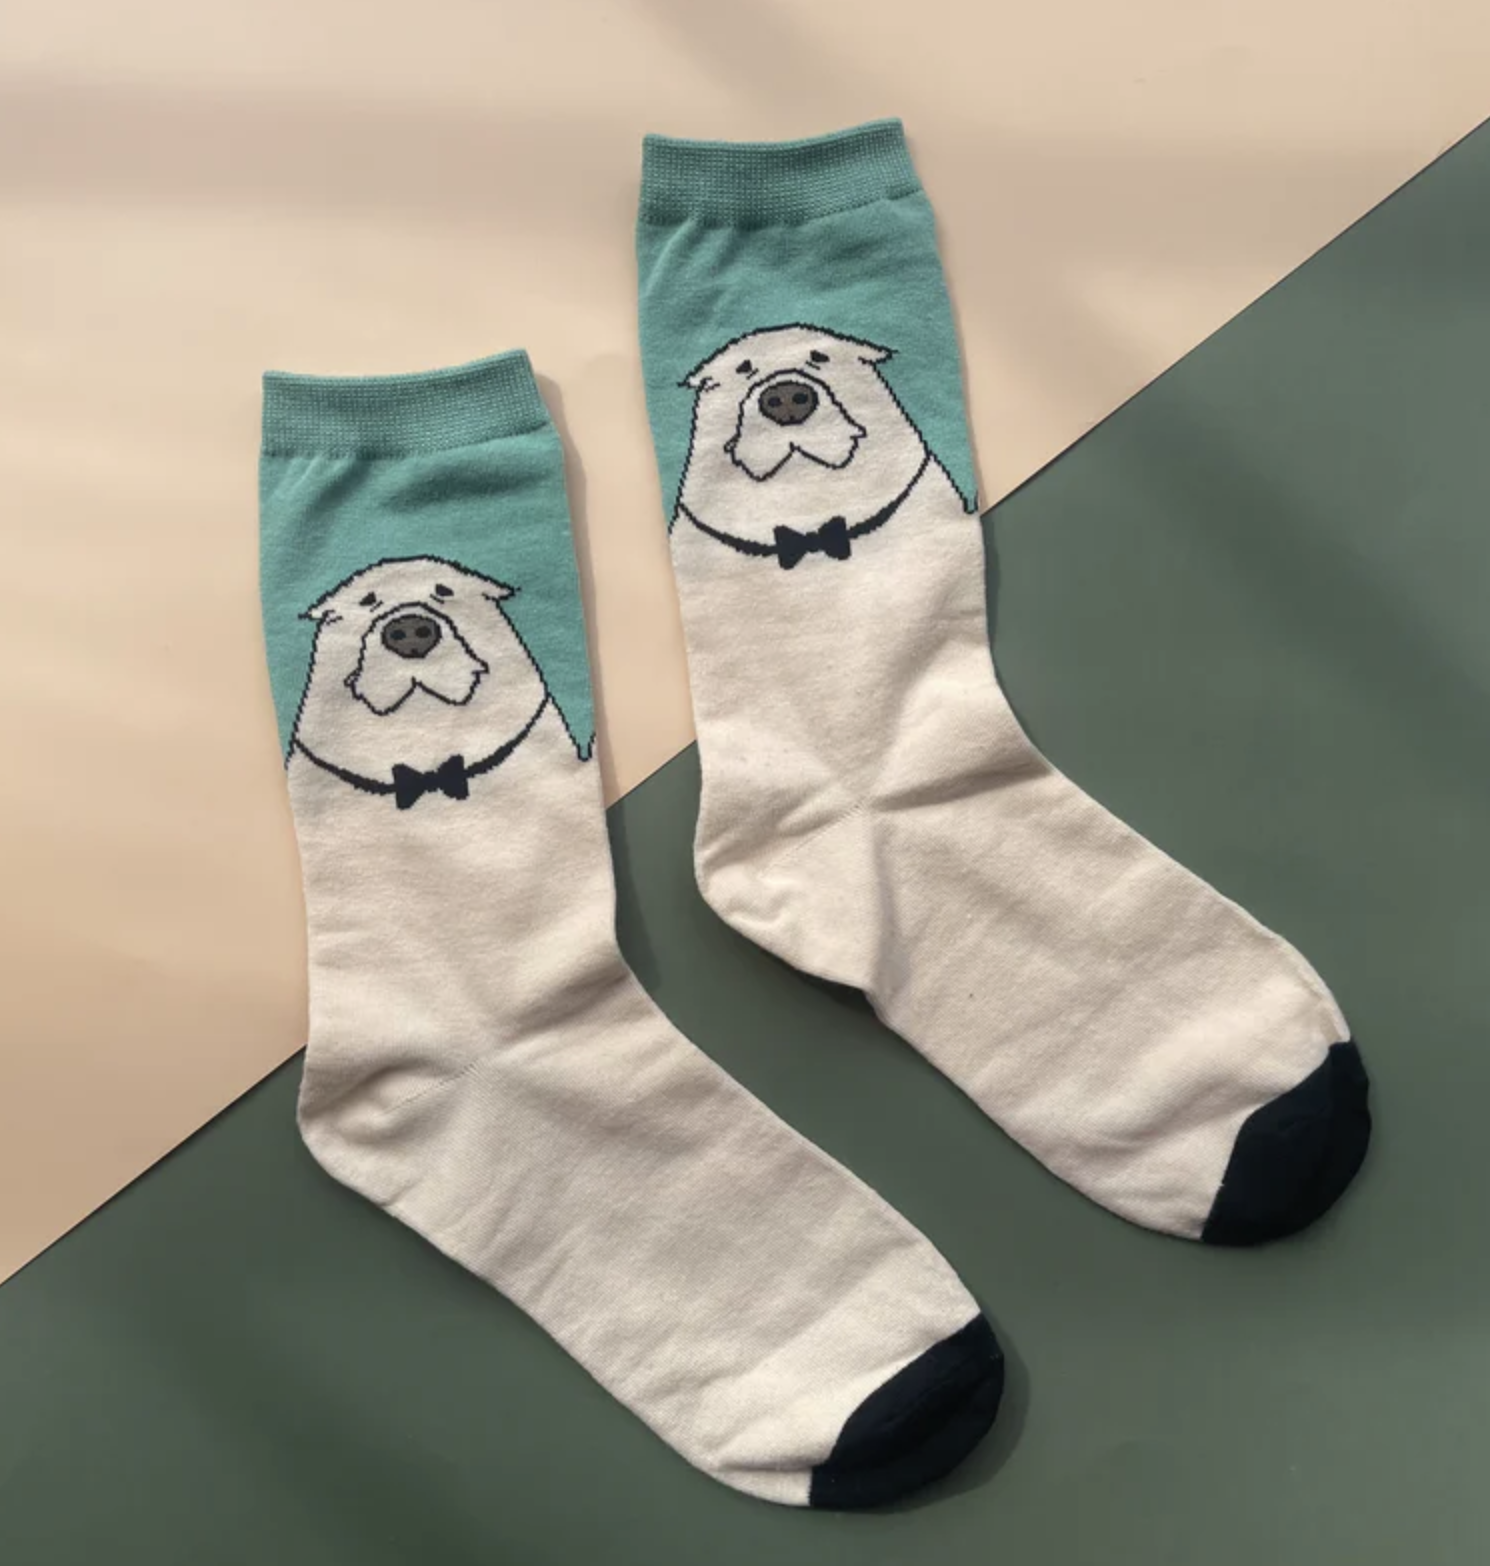 Pair of socks with pug face and bow tie design displayed on a flat surface. Suitable for quirky fashion enthusiasts